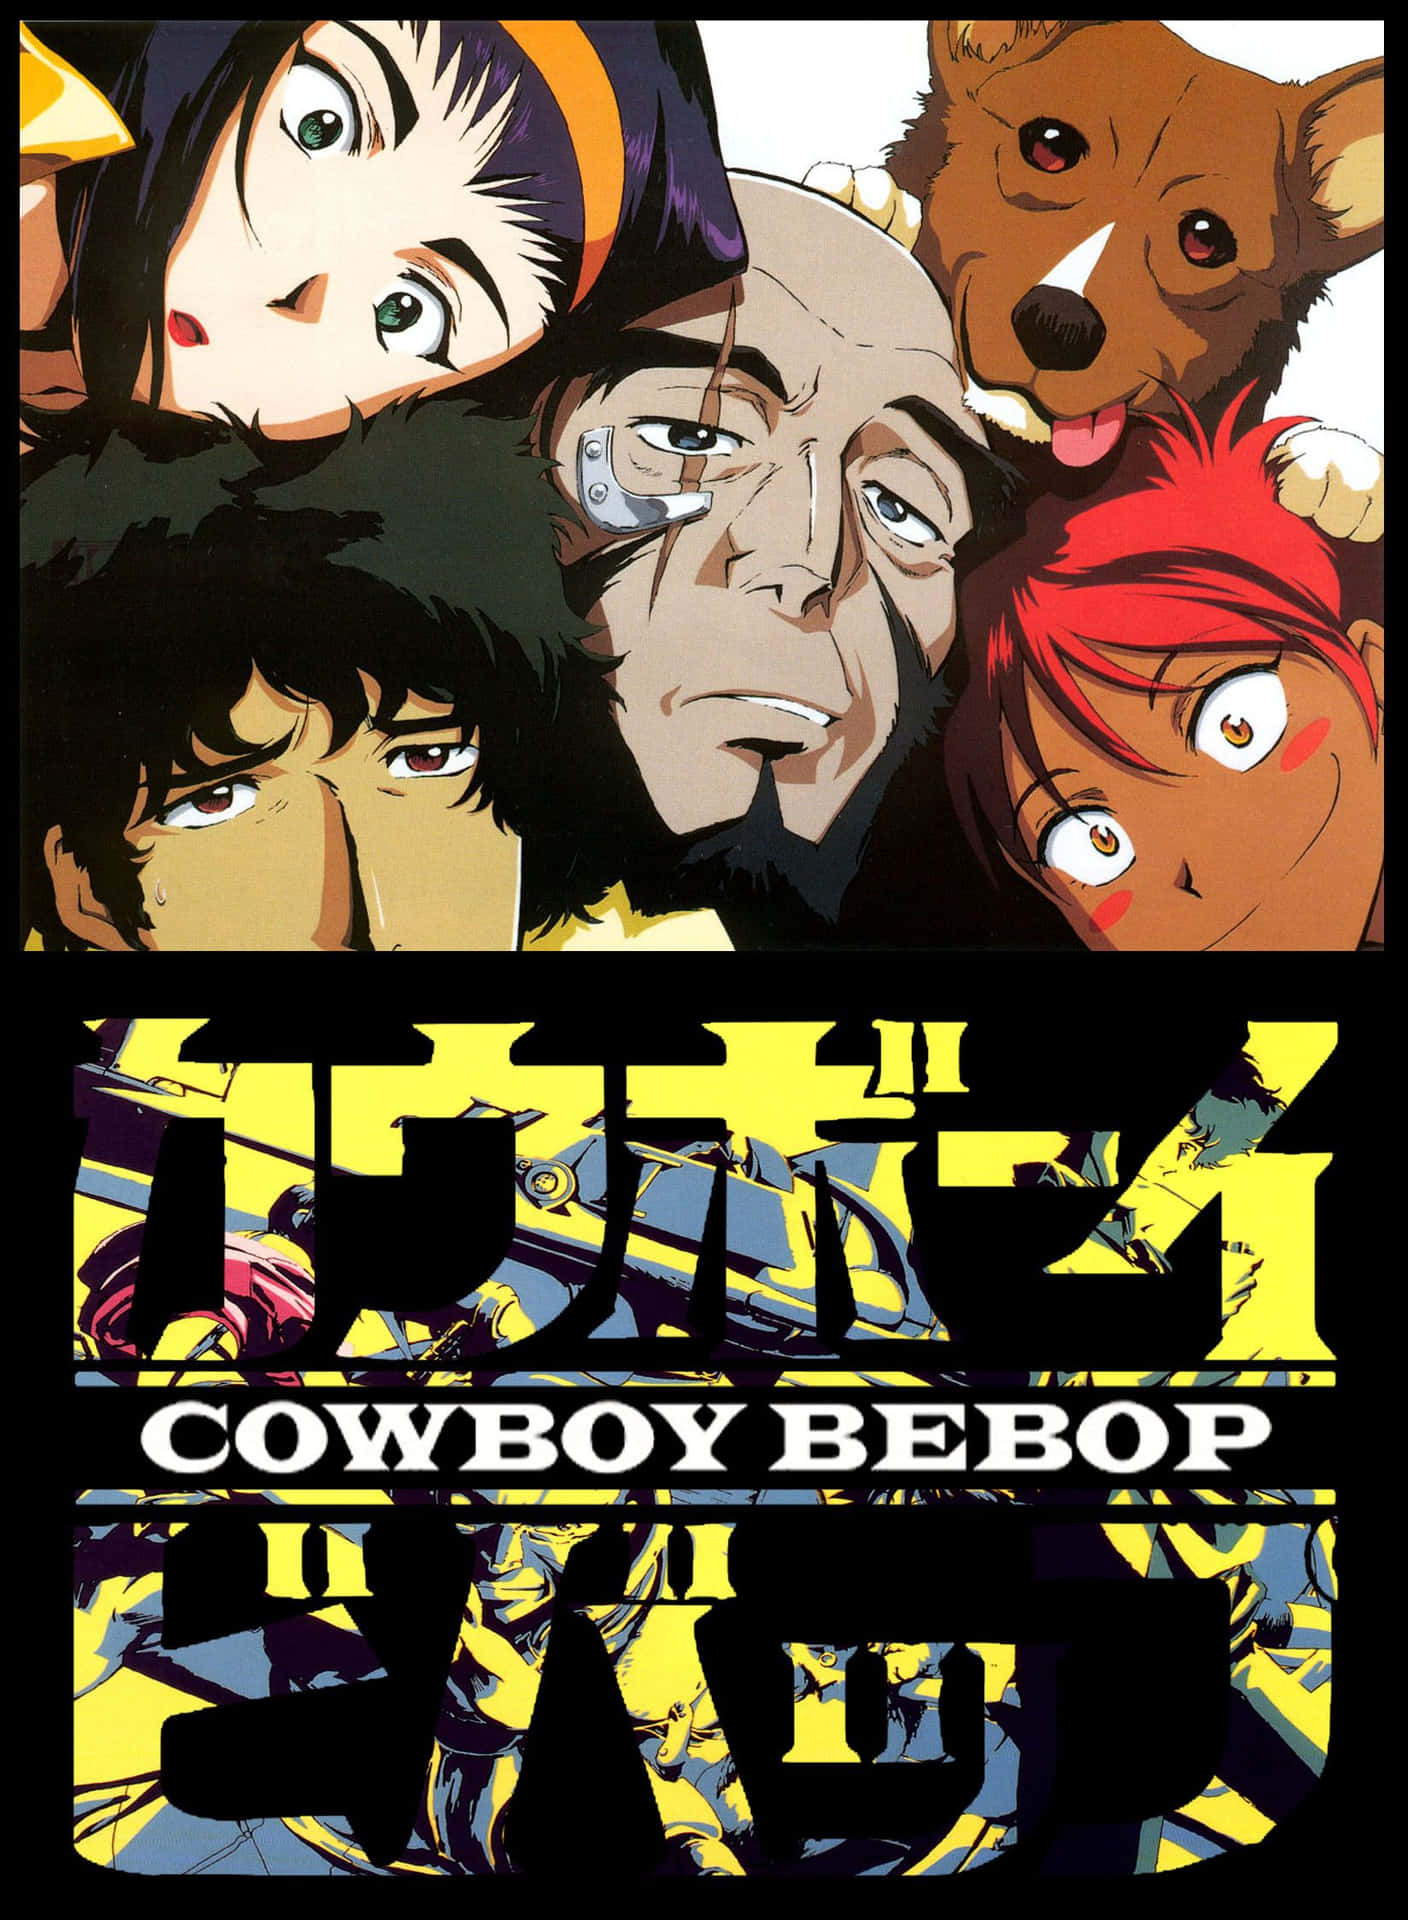 Extended the image for iPhone wallpaper  rcowboybebop